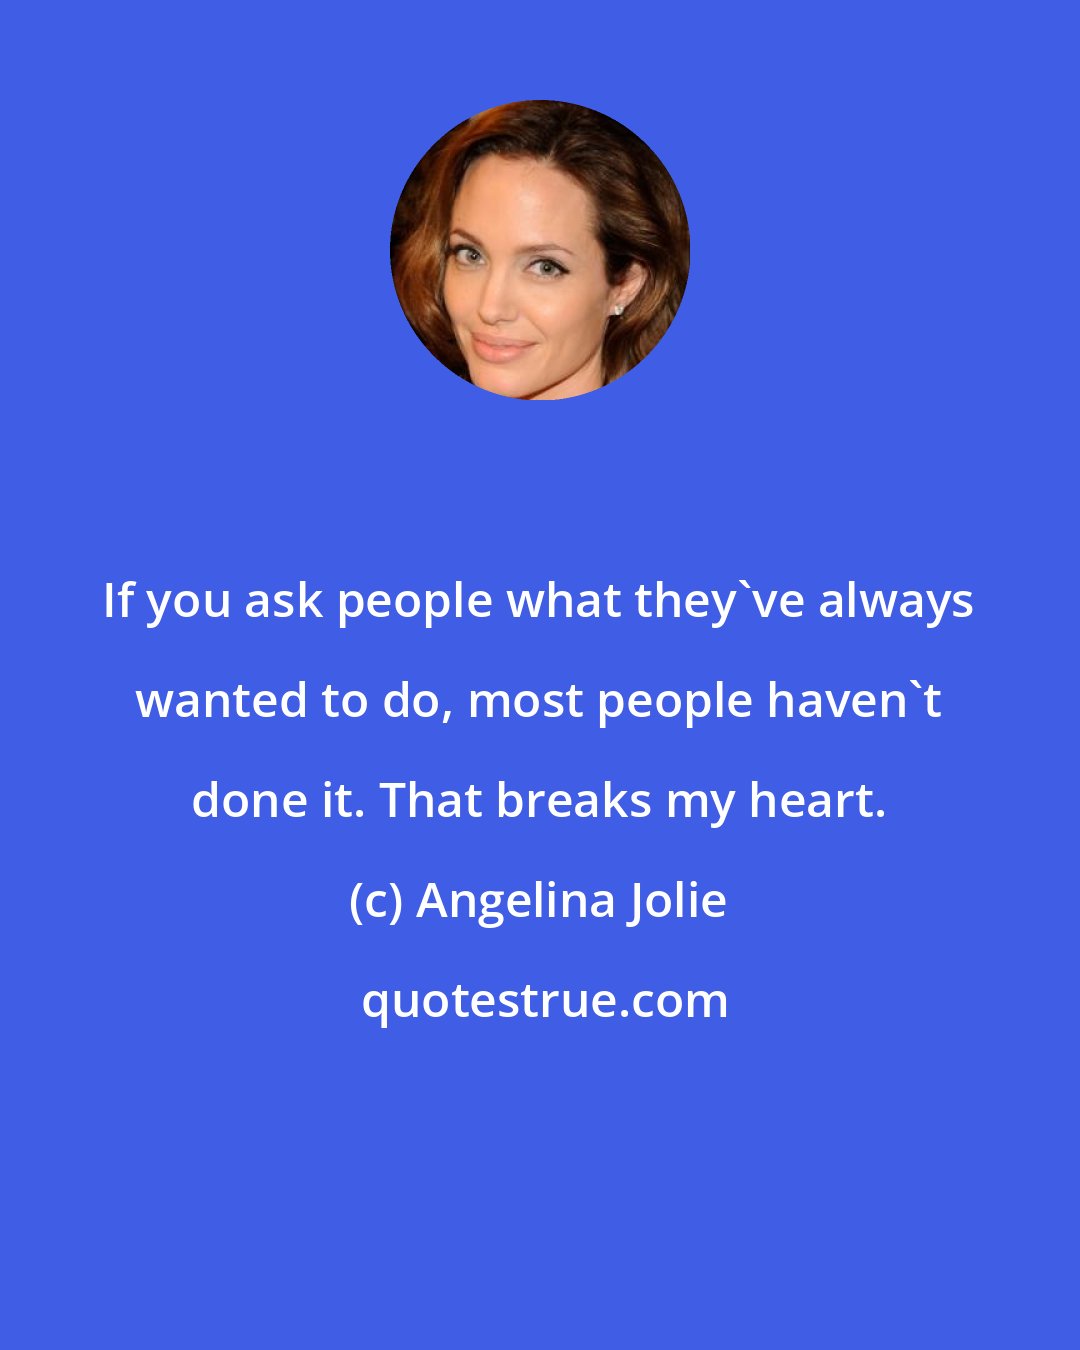 Angelina Jolie: If you ask people what they've always wanted to do, most people haven't done it. That breaks my heart.